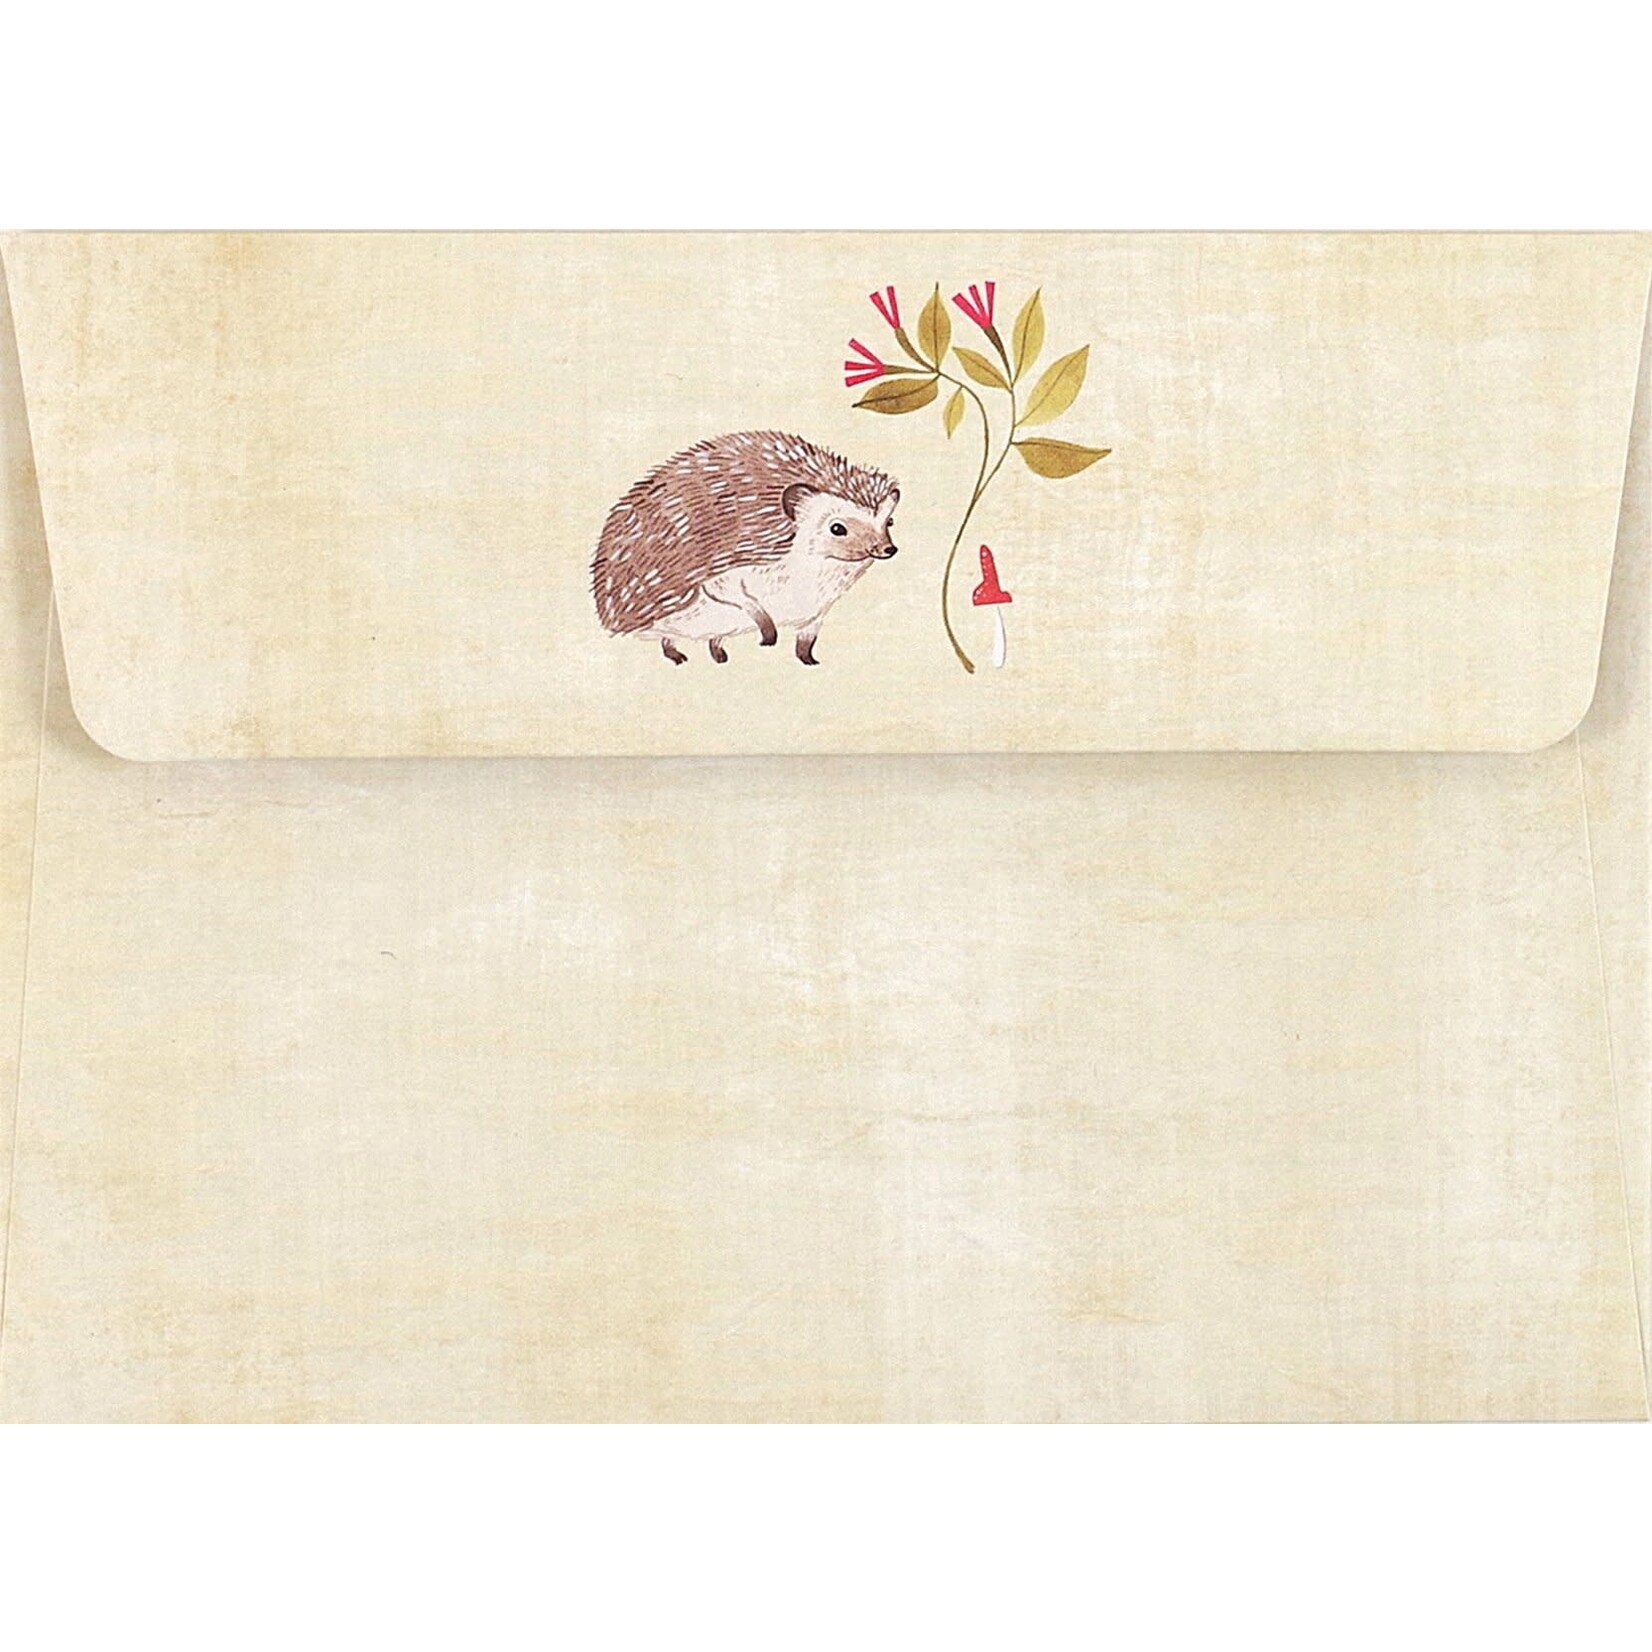 Peter Pauper Press Hedgehog Boxed Note Cards